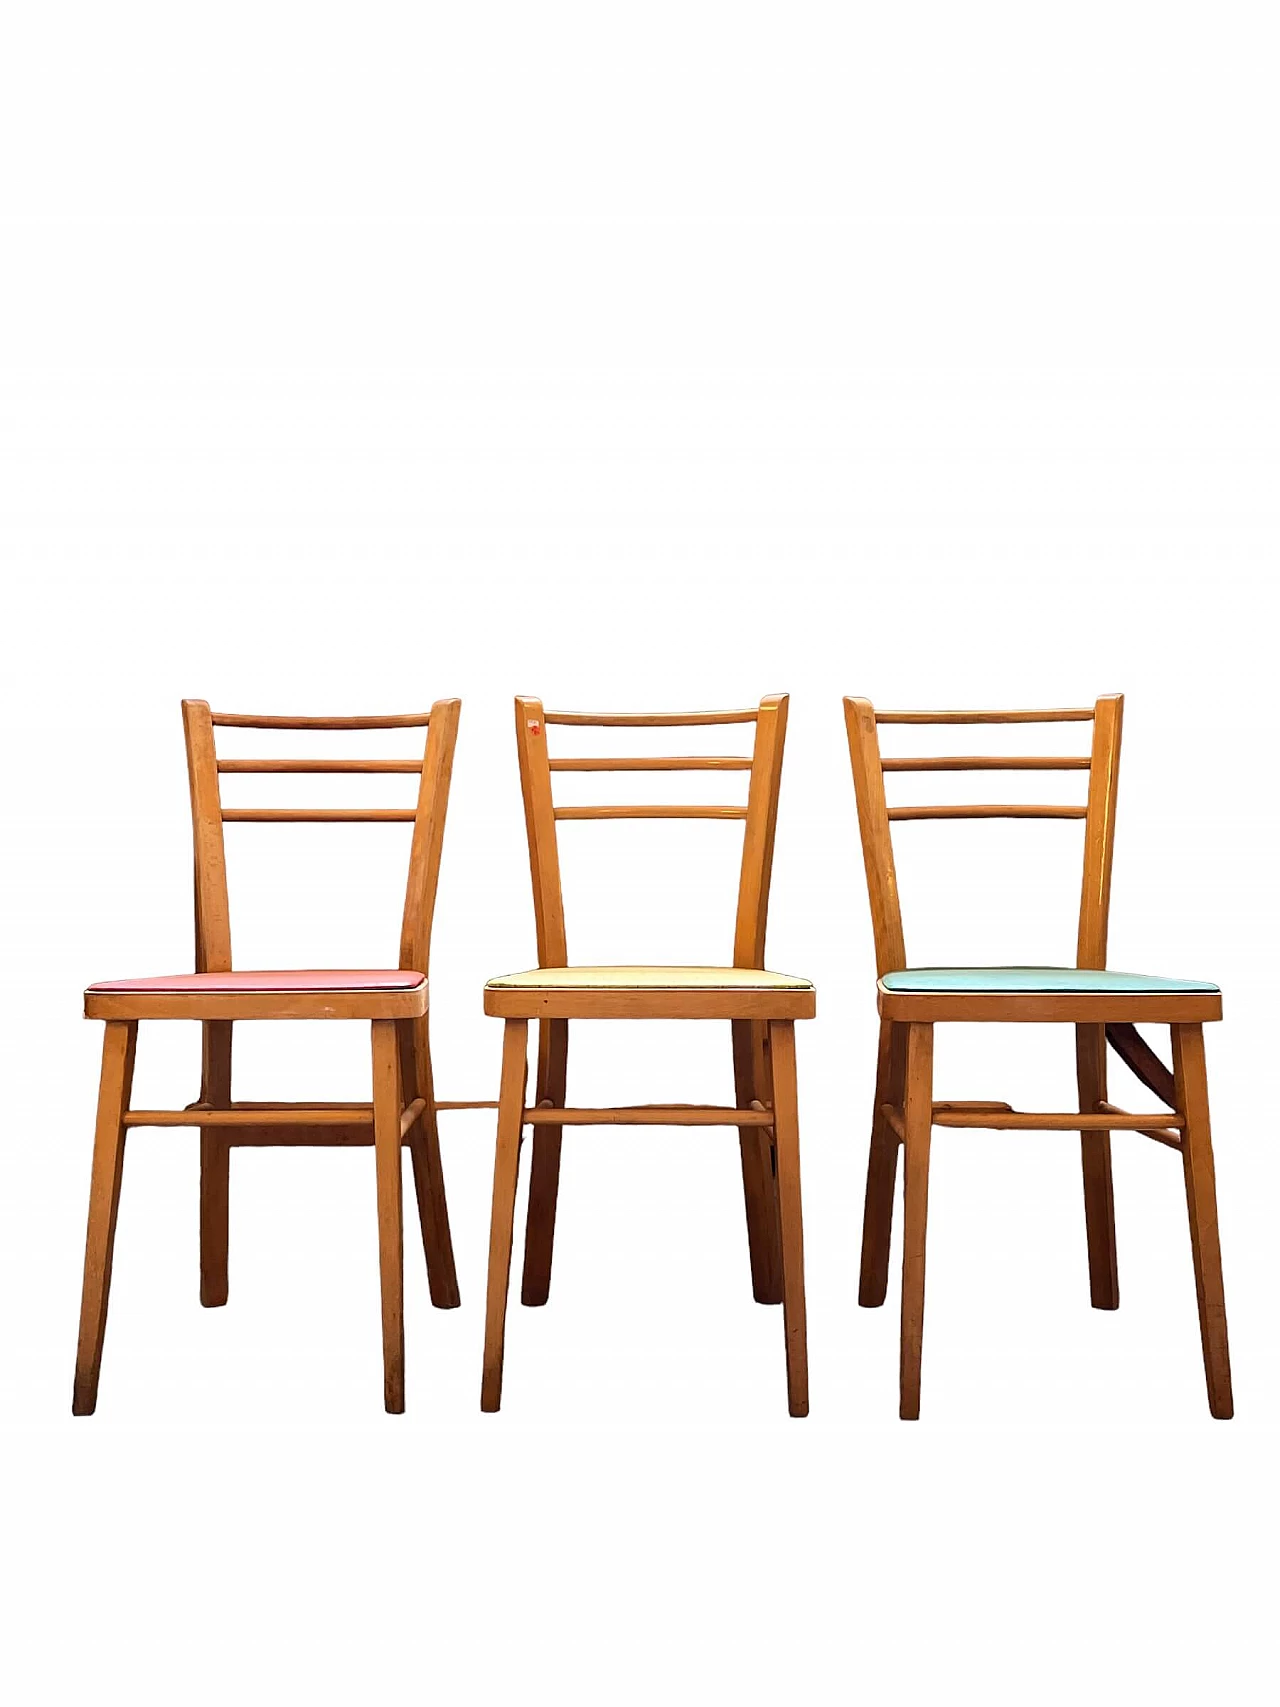 6 Chairs in wood and colored skai, 1960s 5